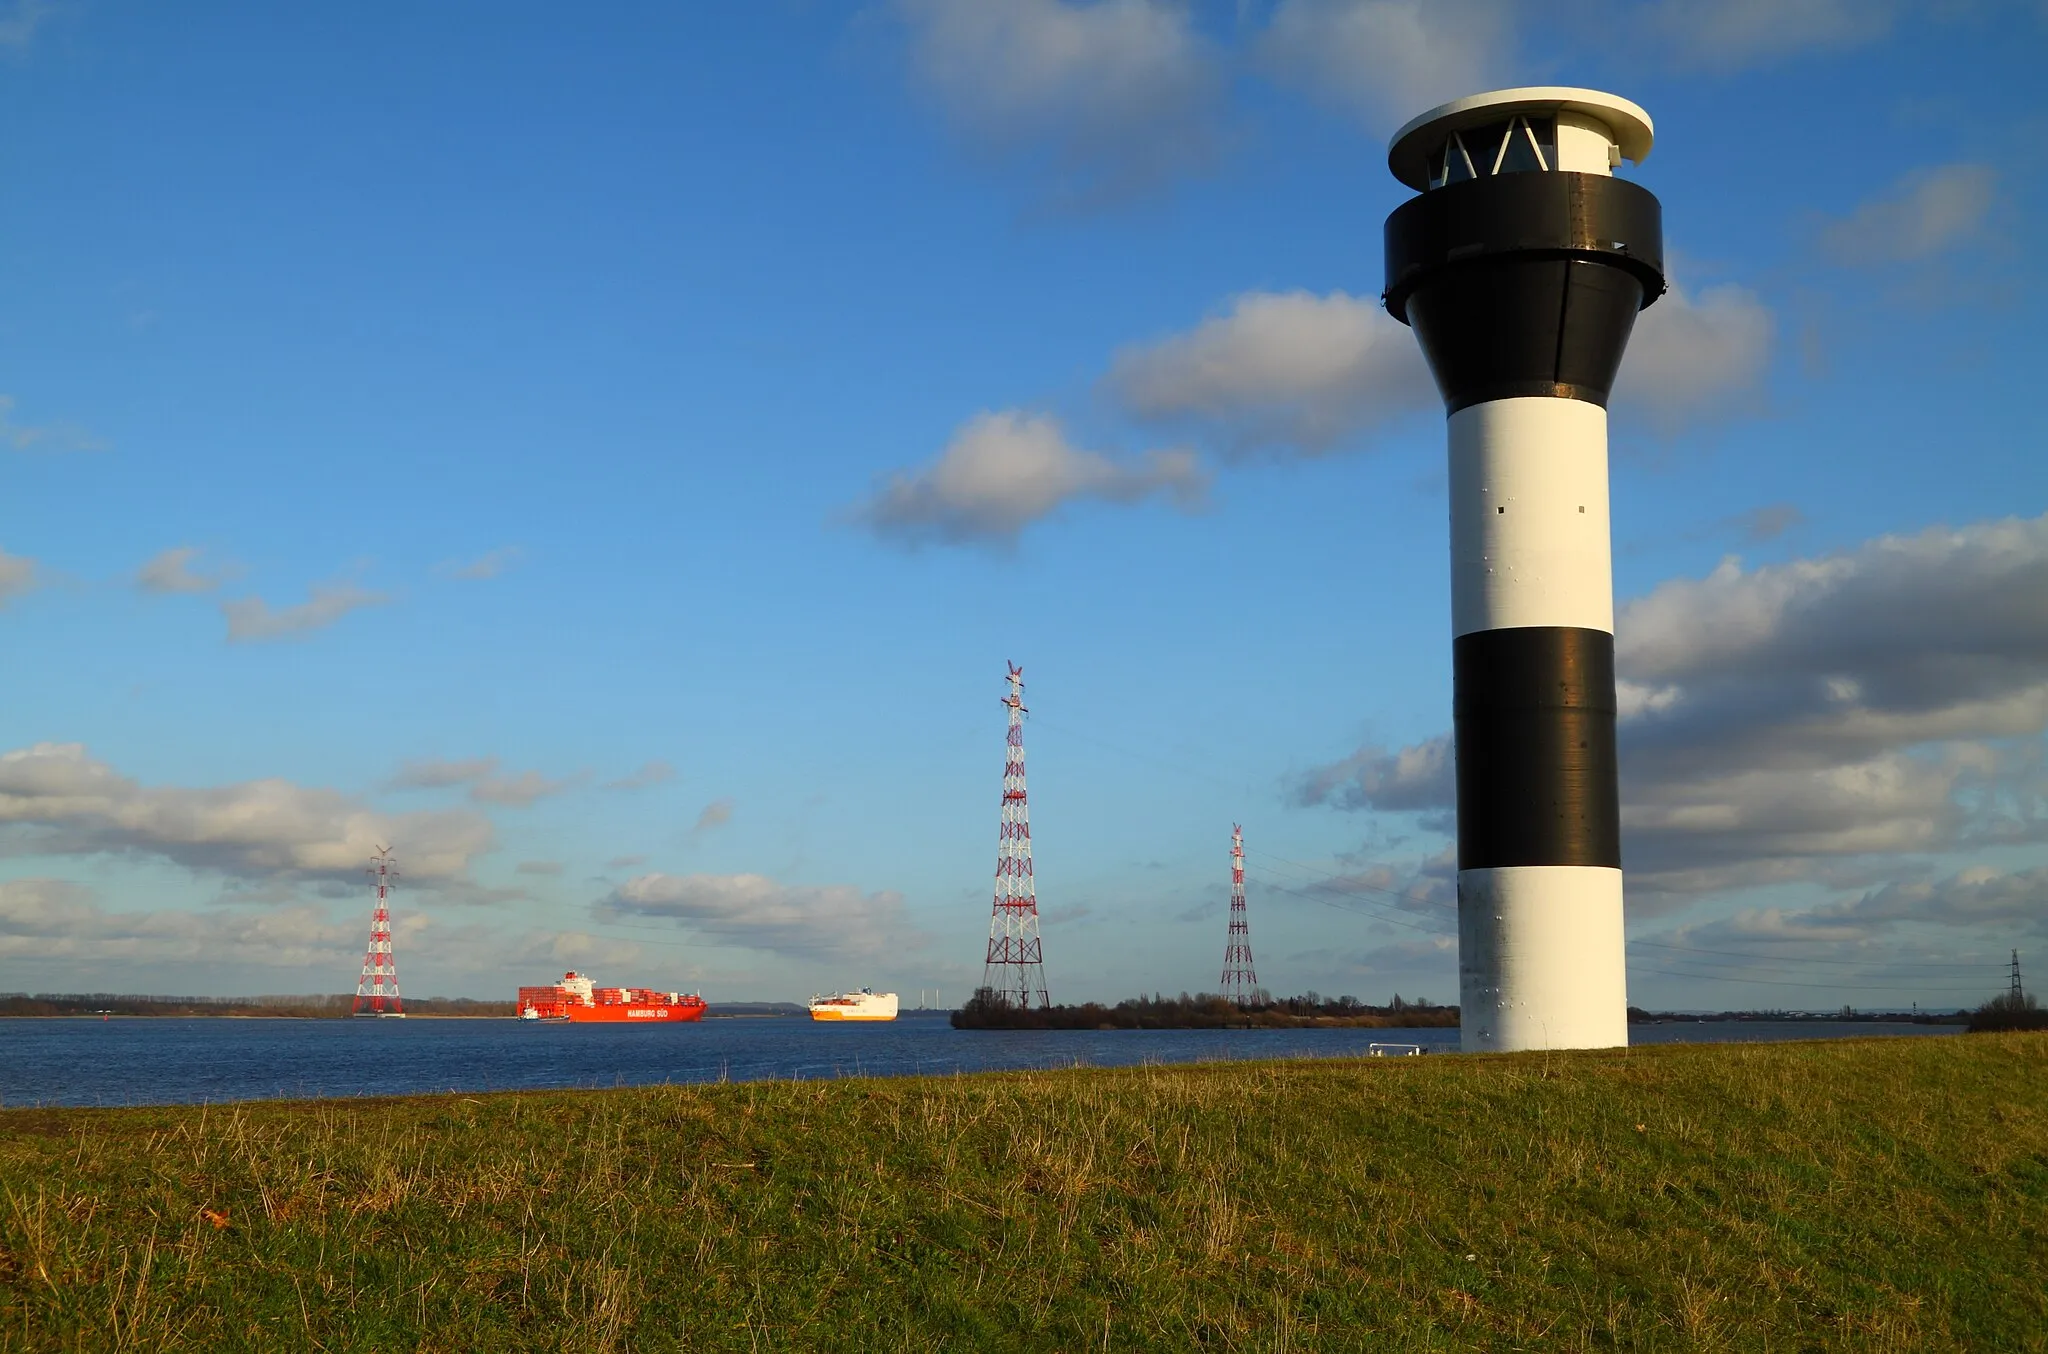 Photo showing: The Elbe near Twielenfleth, Twielenfleth lighthouse (Leitfeuer) and Elbe power line crossings 1 + 2.